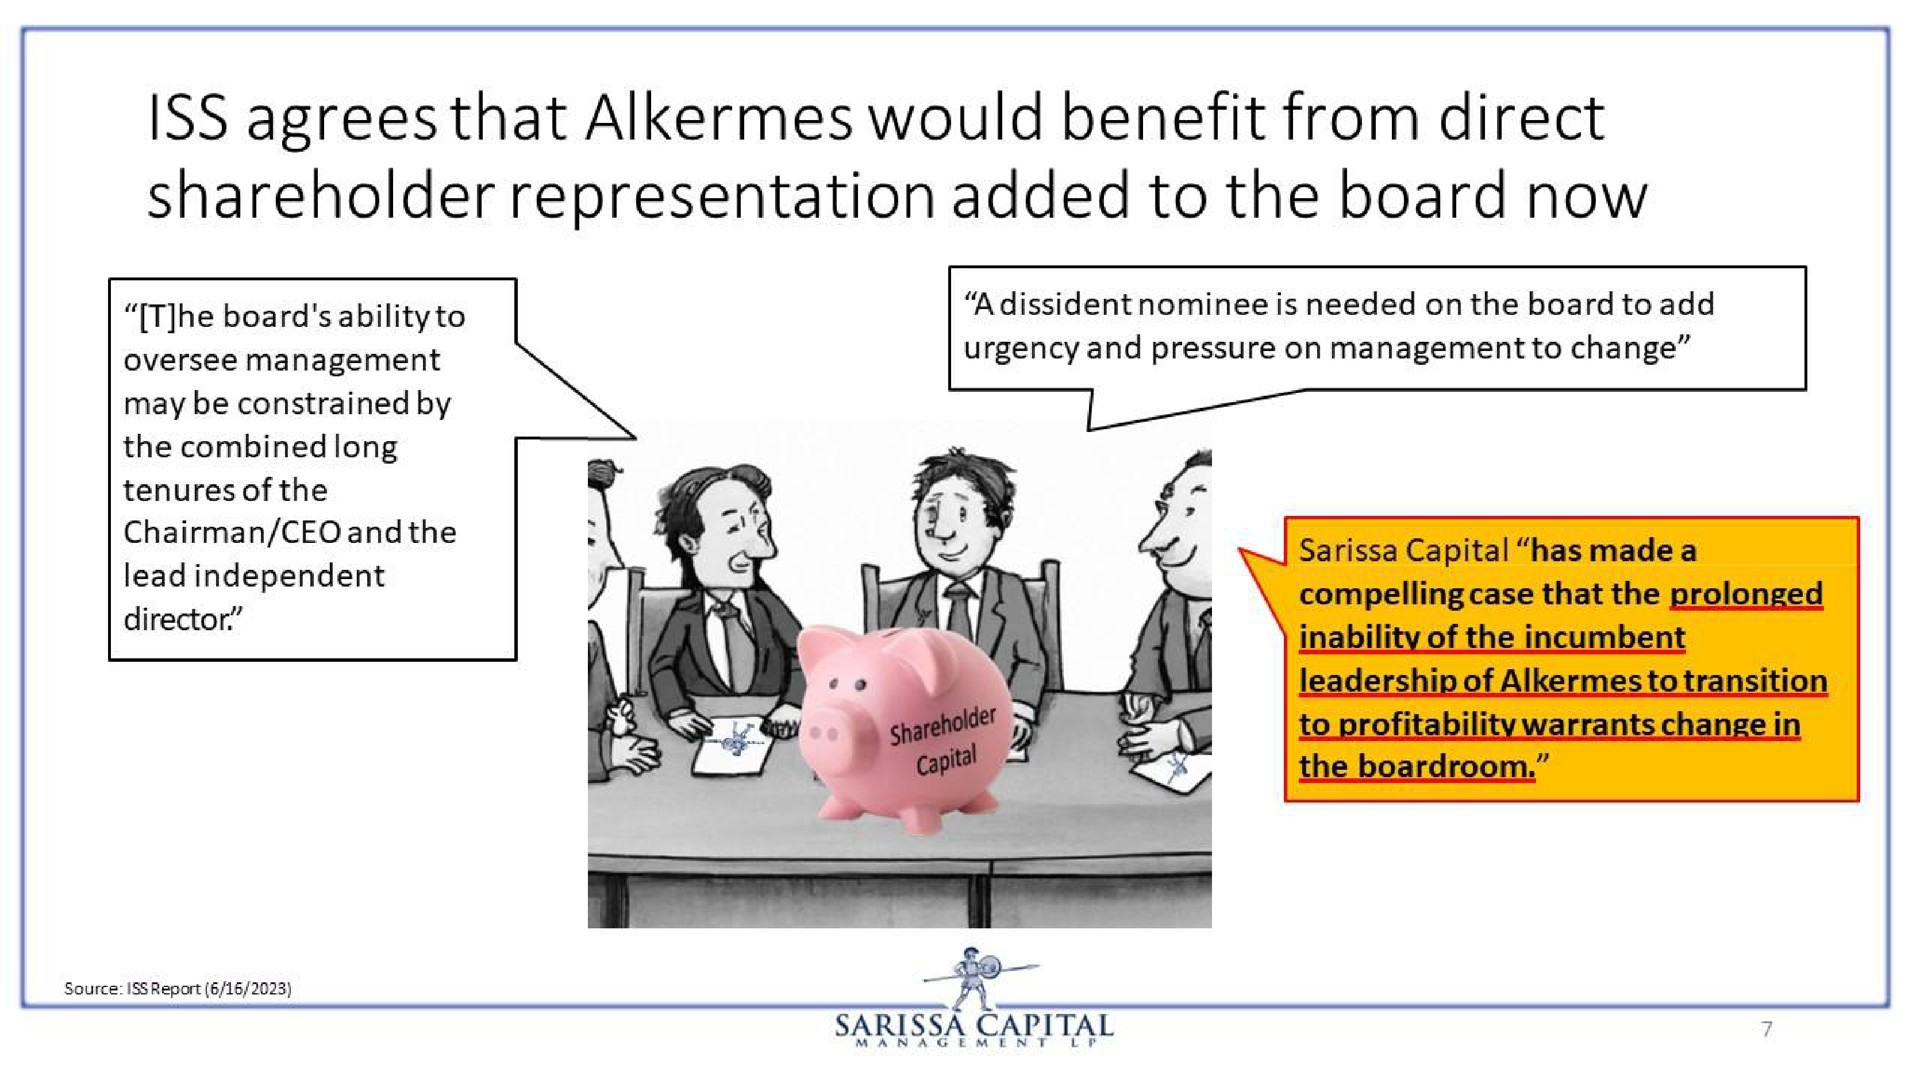 iss agrees that alkermes would benefit from direct shareholder representation added to the board now | Sarissa Capital